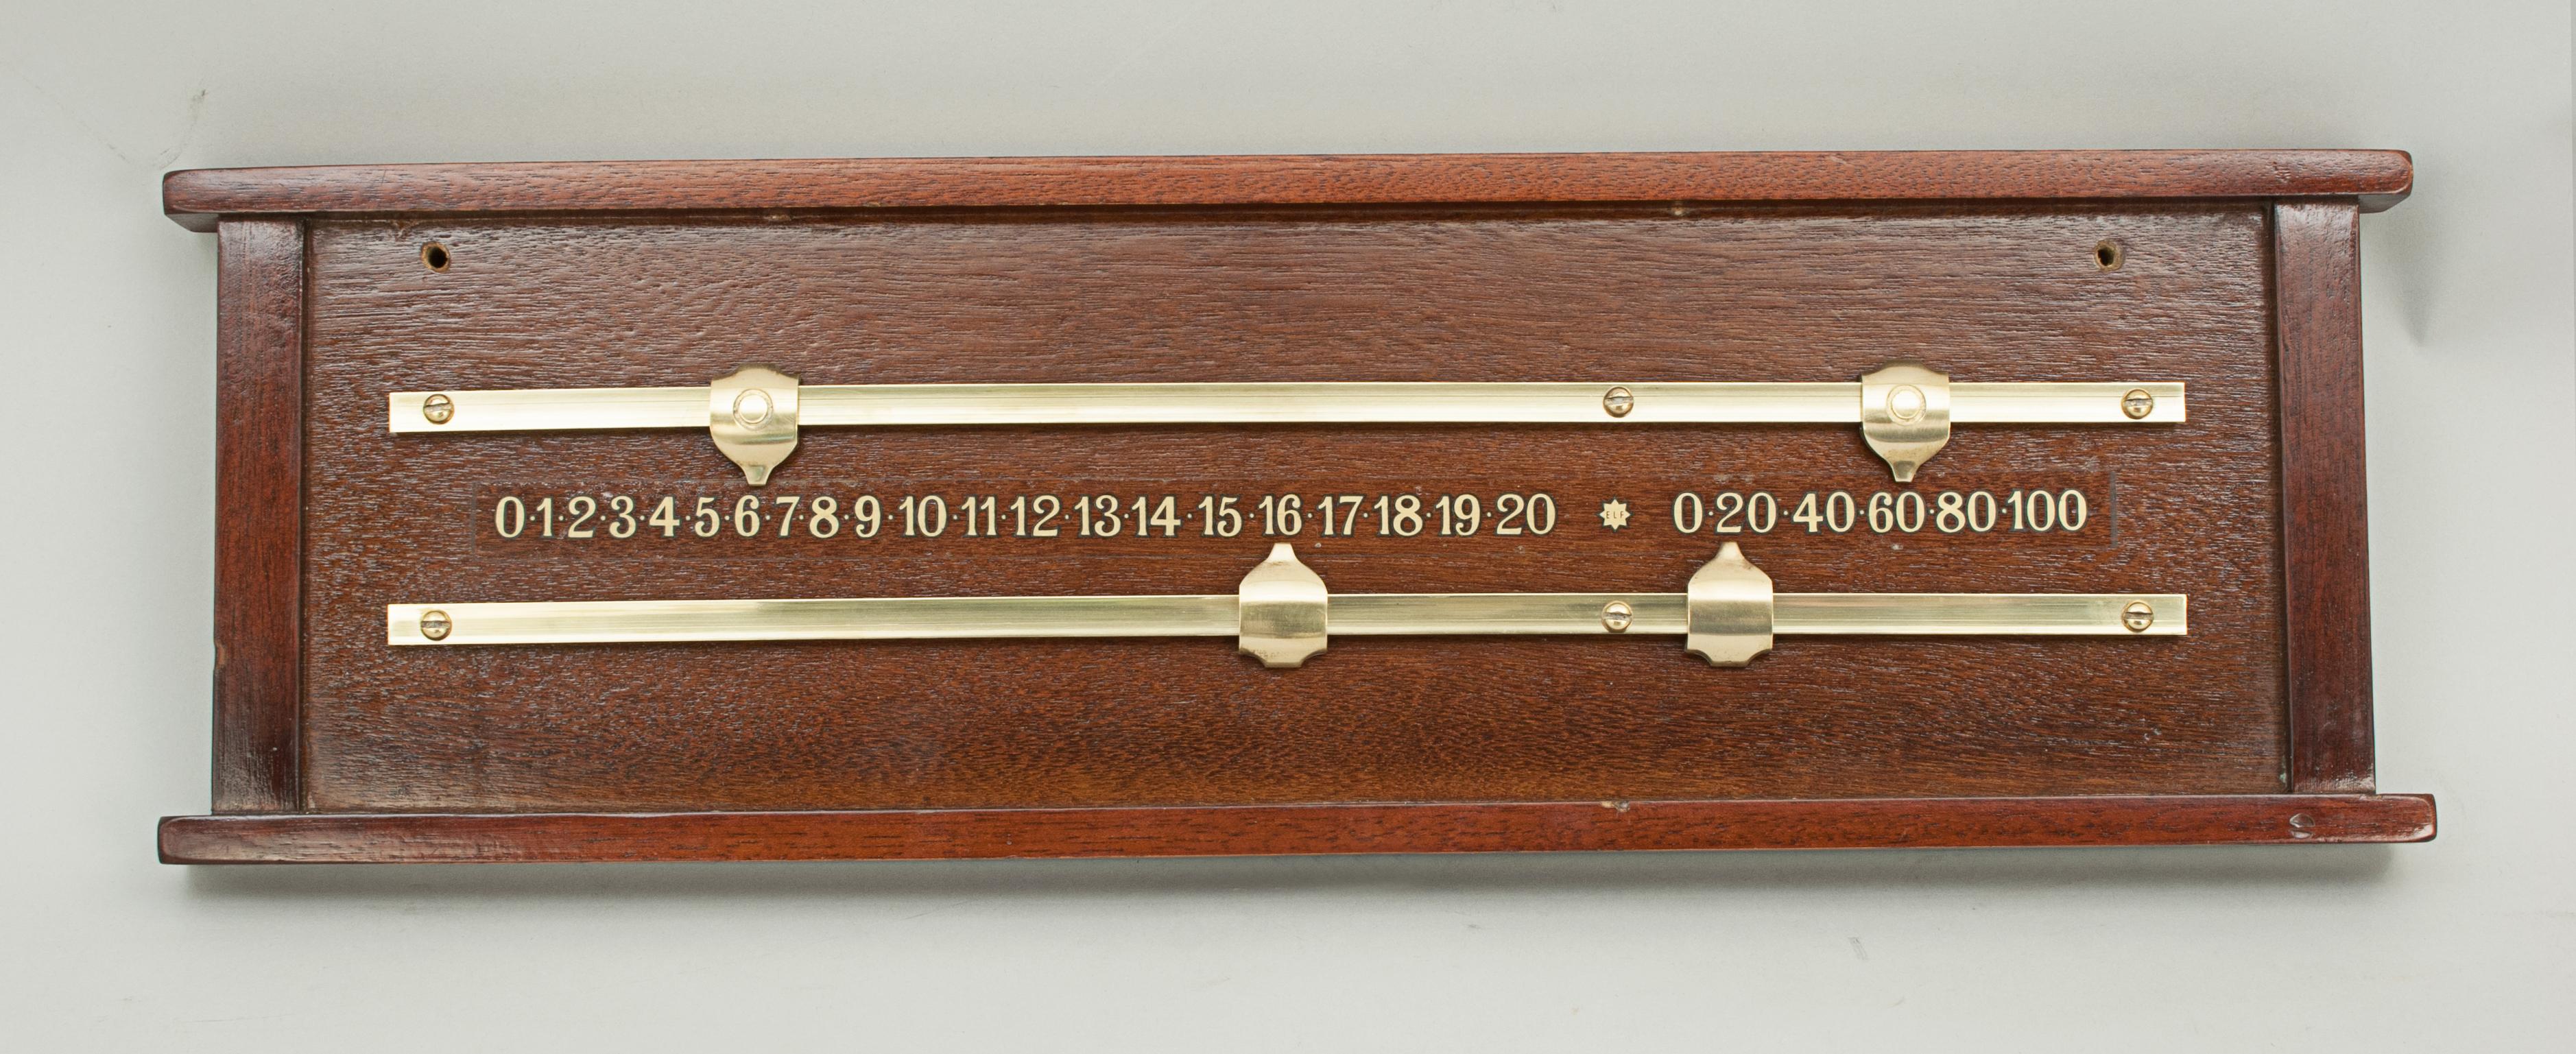 Mahogany Score Board.
A nice billiard scoreboard with brass slides and pointers, one set with spot. The transfer numbers are 0 to 20 and 0 to 100 in multiples of 20. A nice clean scorer.
Period: 1300-1349
Year: C. 1930's
Medium: Mahogany
Country: